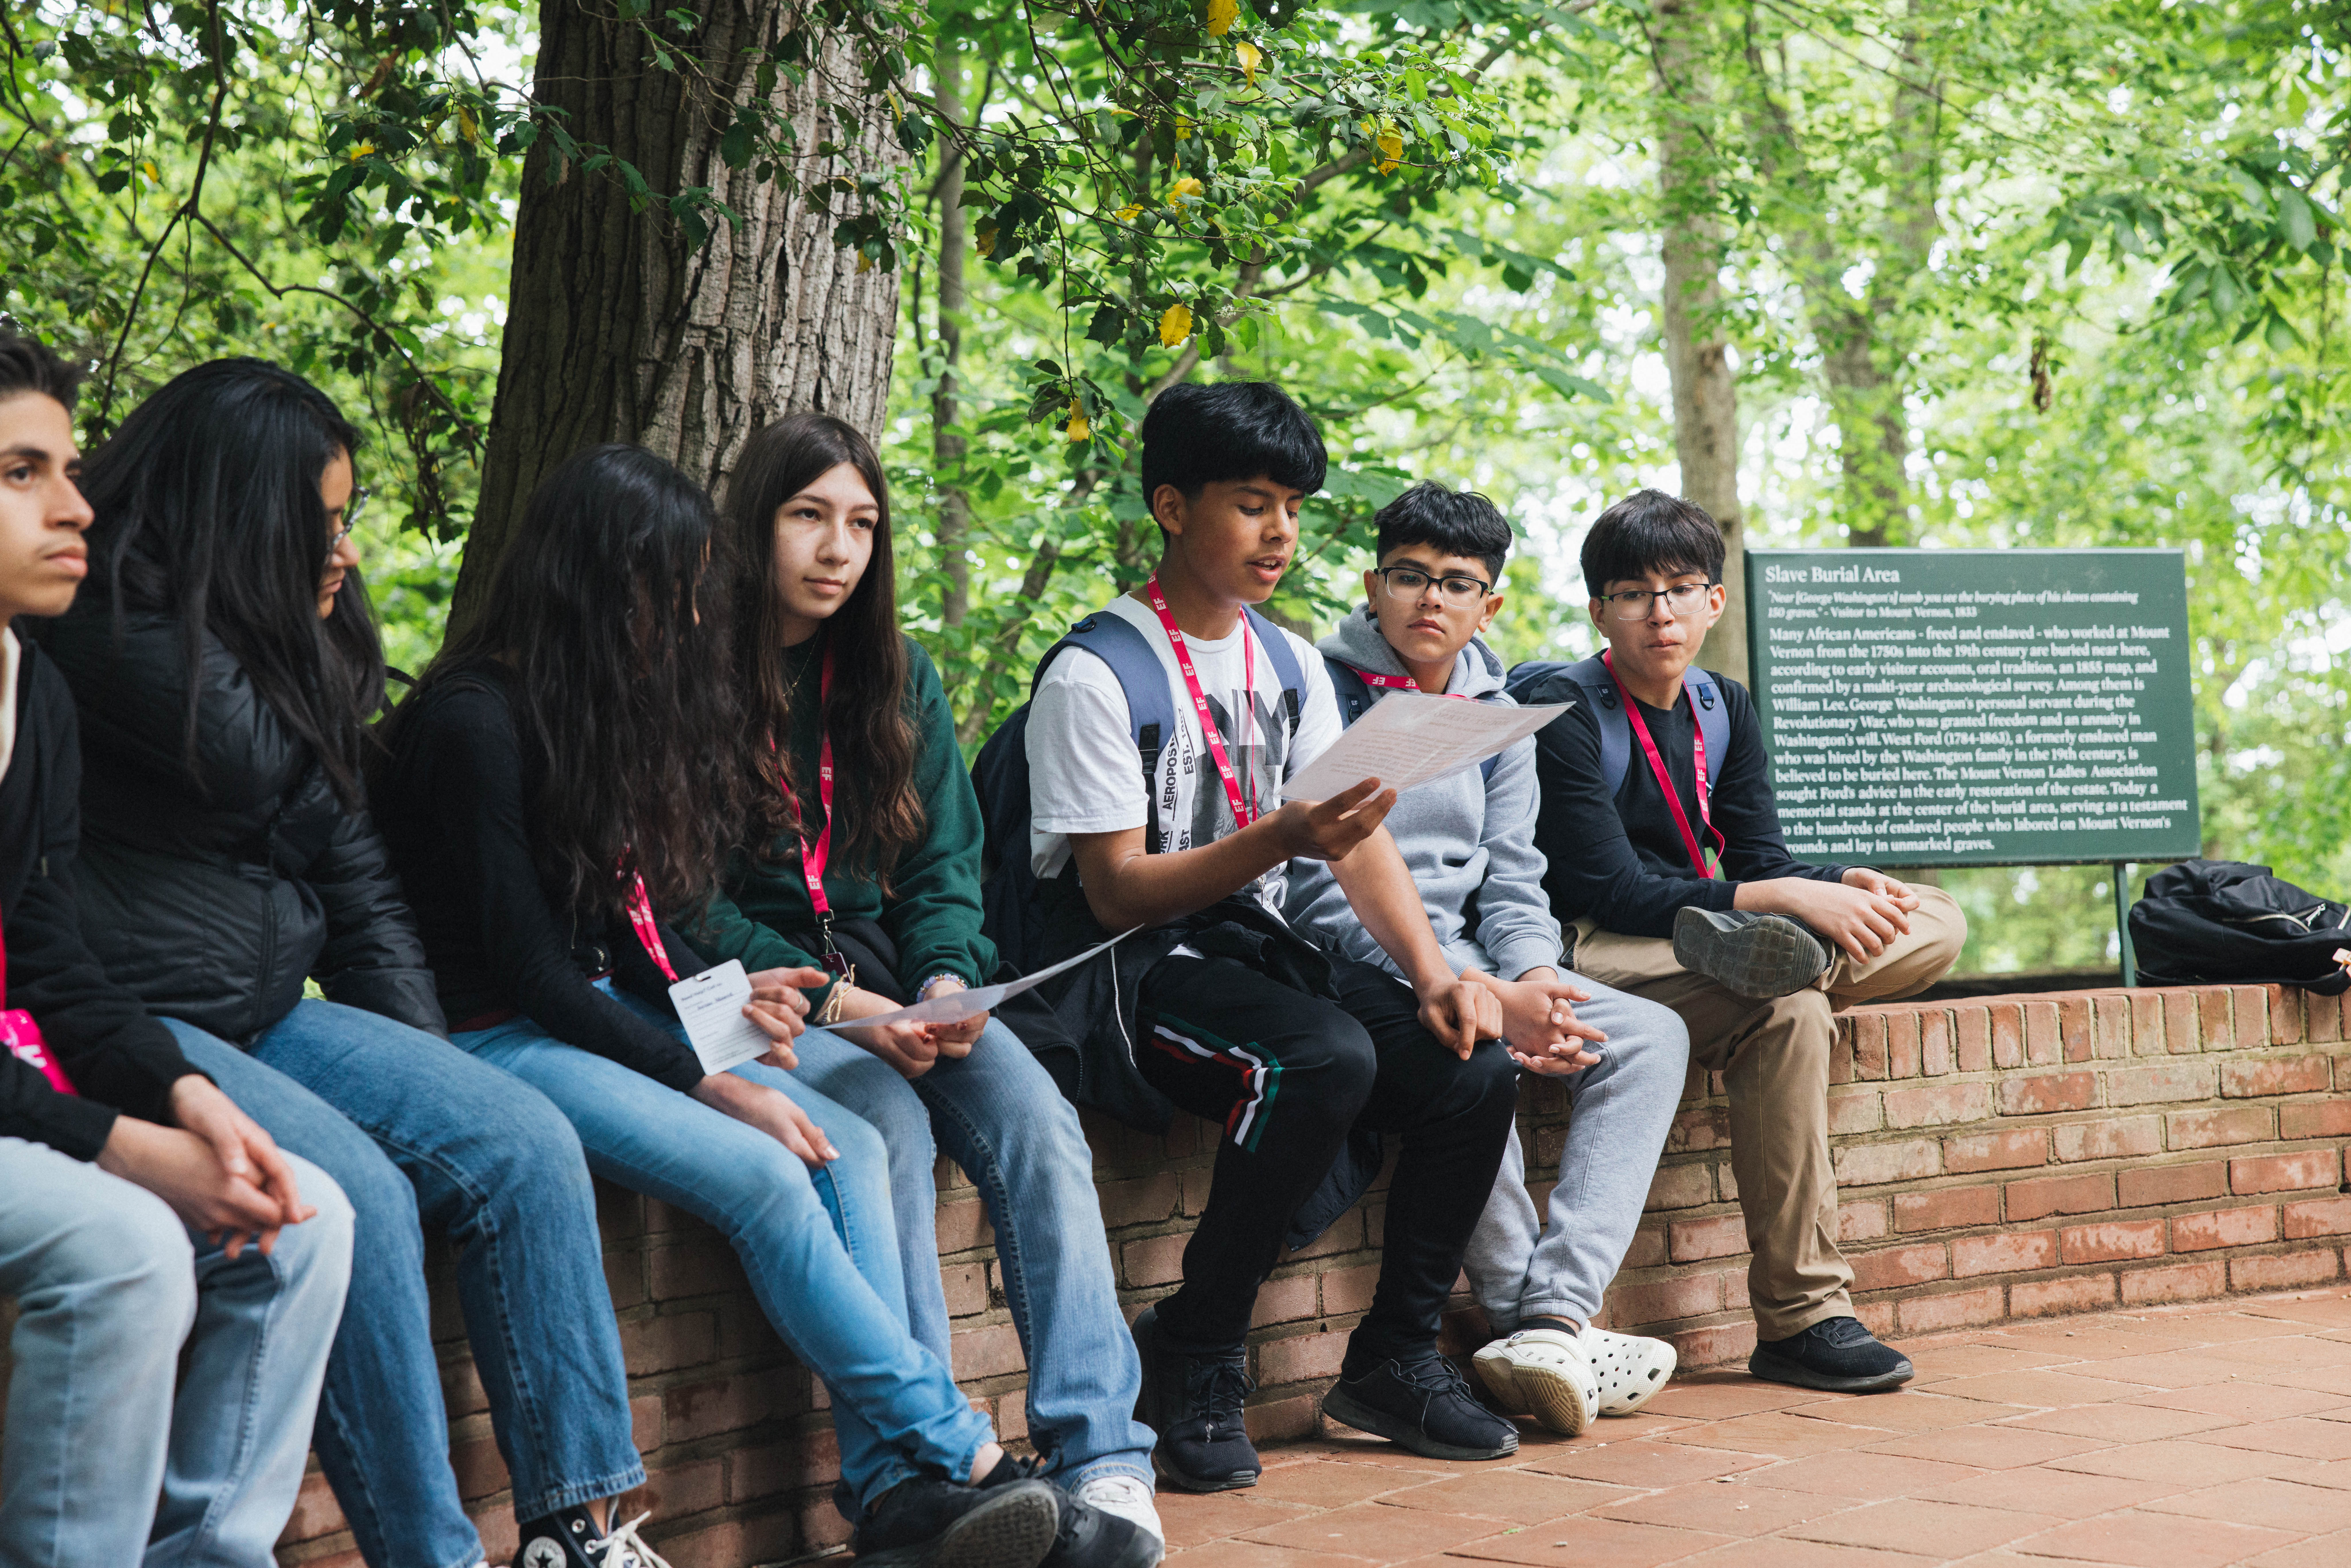 Inside Mount Vernon: Tamika's students read tributes to the enslaved people who worked there.